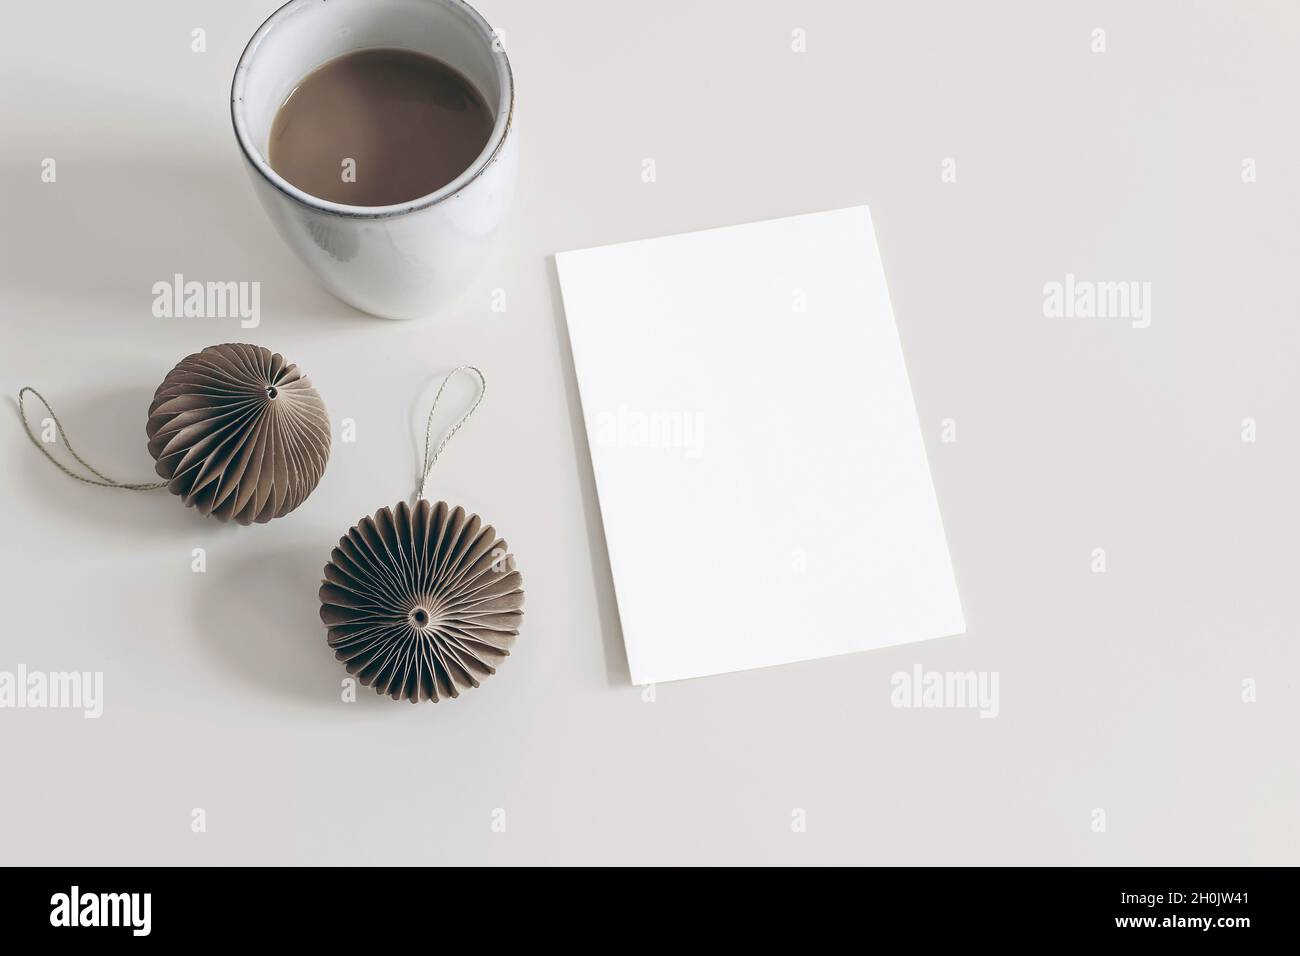 Winter holiday stationery mockup. Brown paper Christmas ornaments and cup of coffee isolated on white table background. Blank greeting card Stock Photo